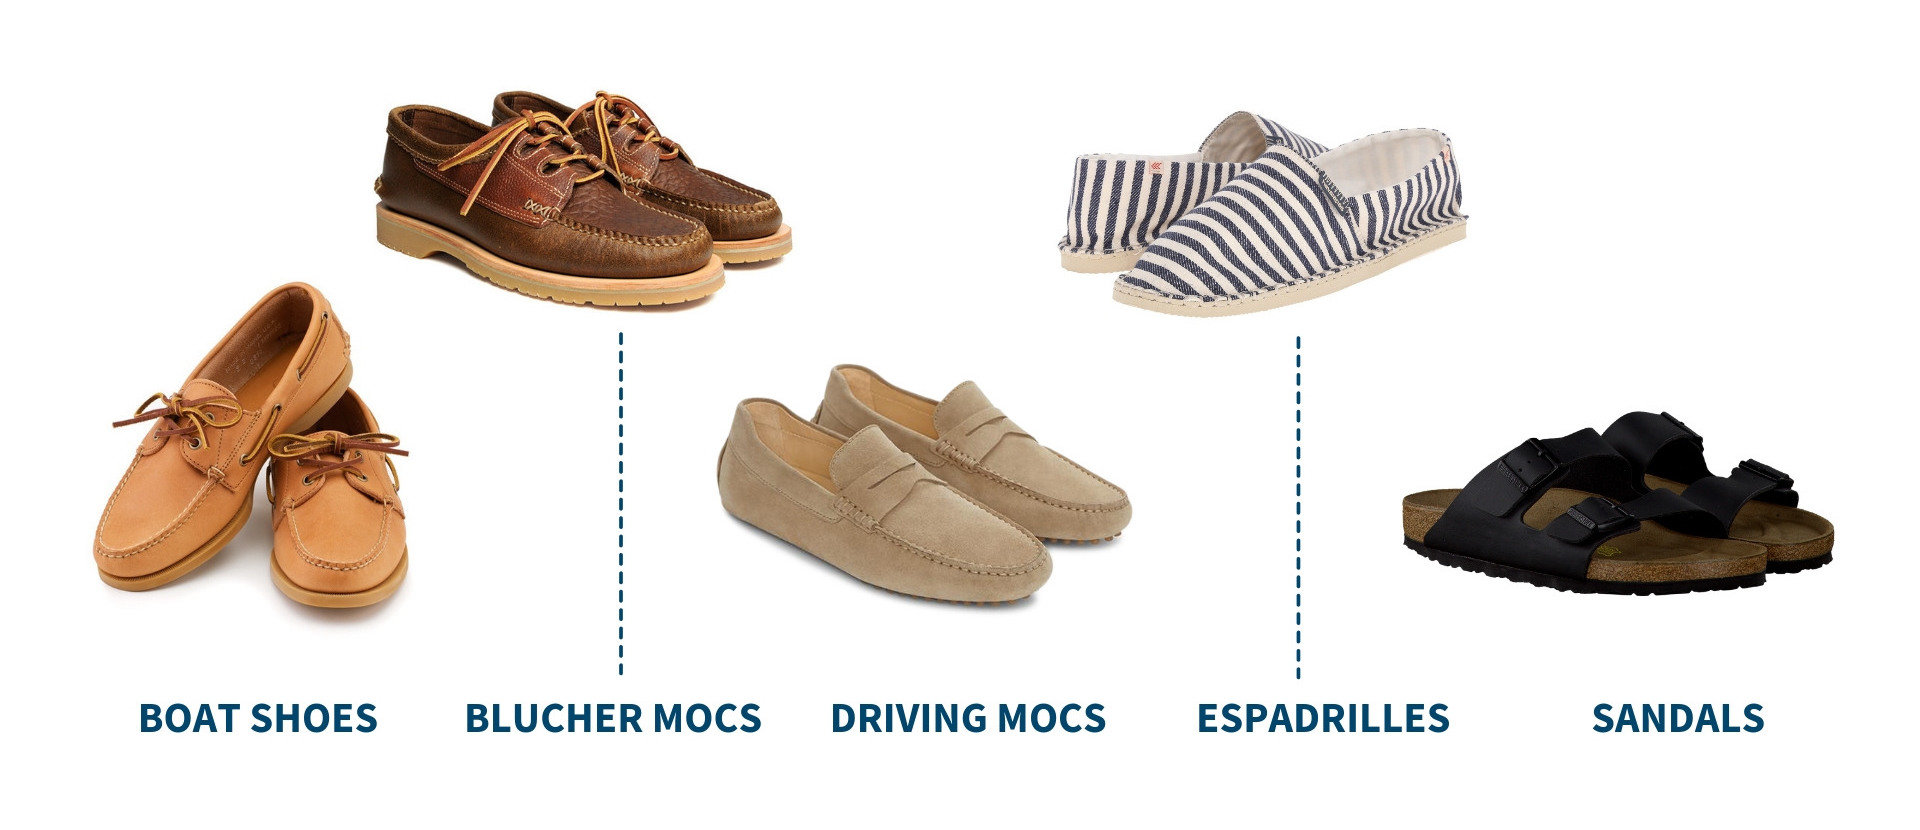 3 Minimalist Shoe Collections for Men 